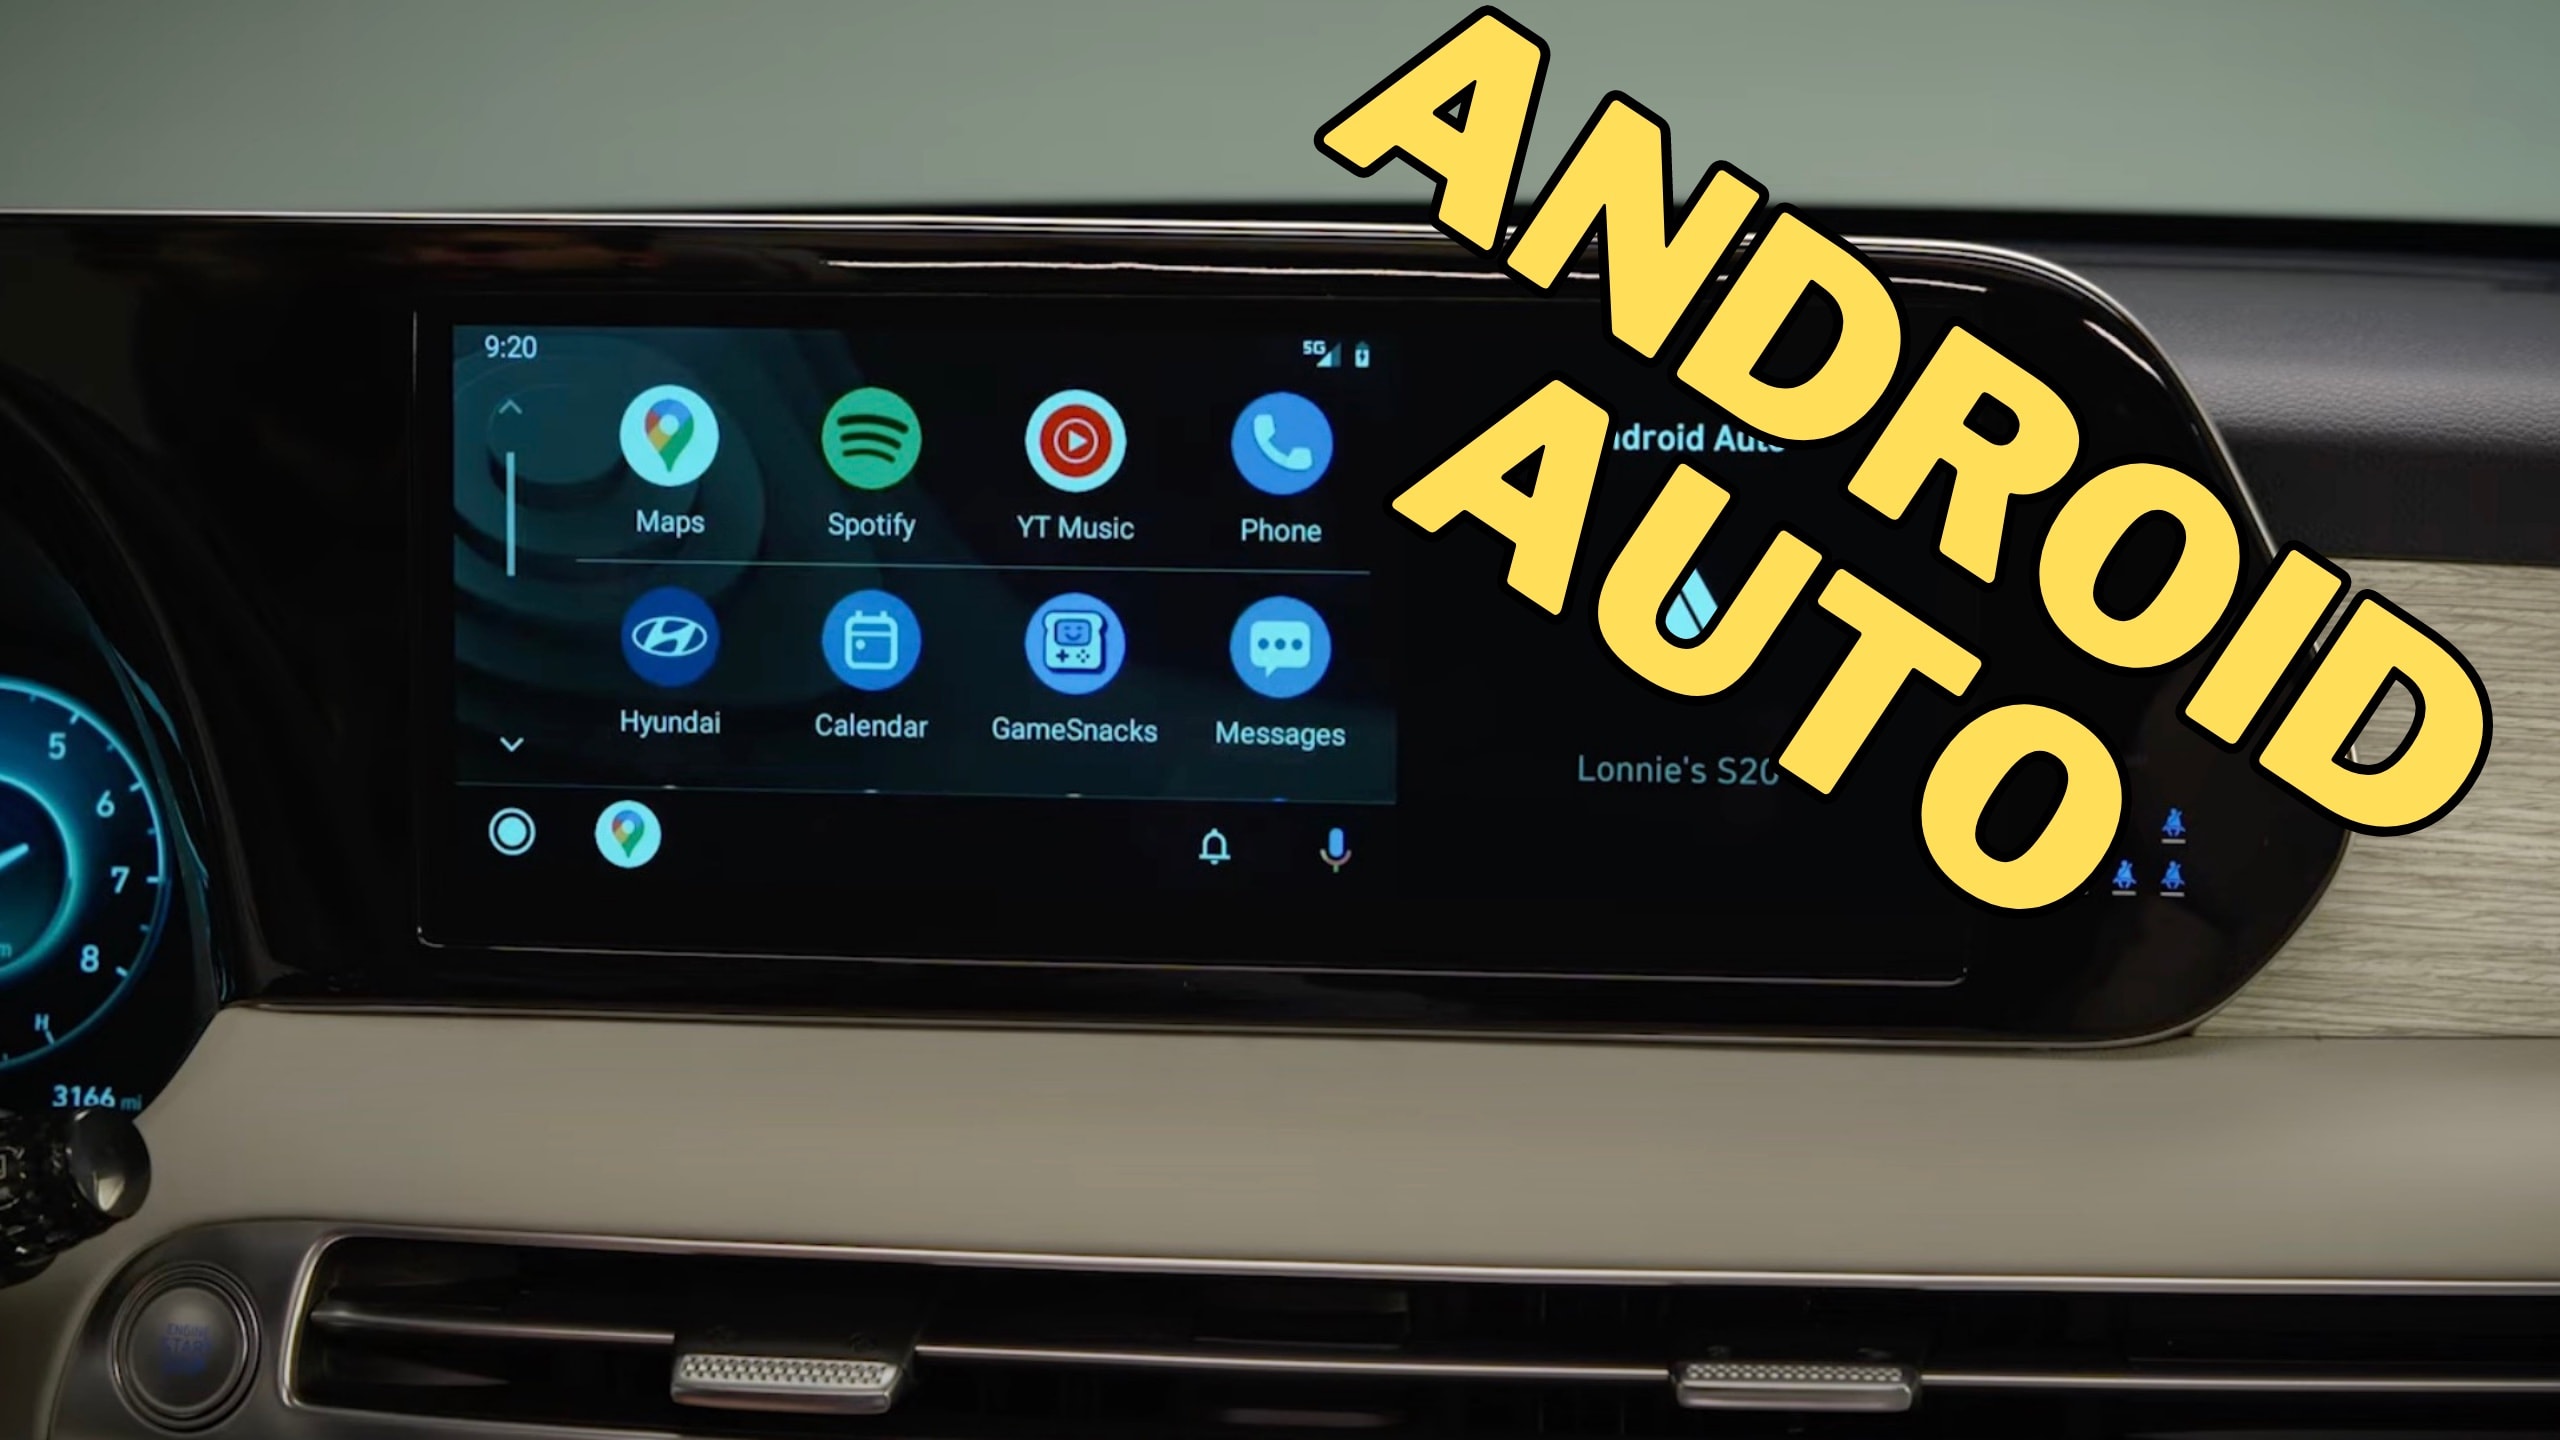  Android Auto